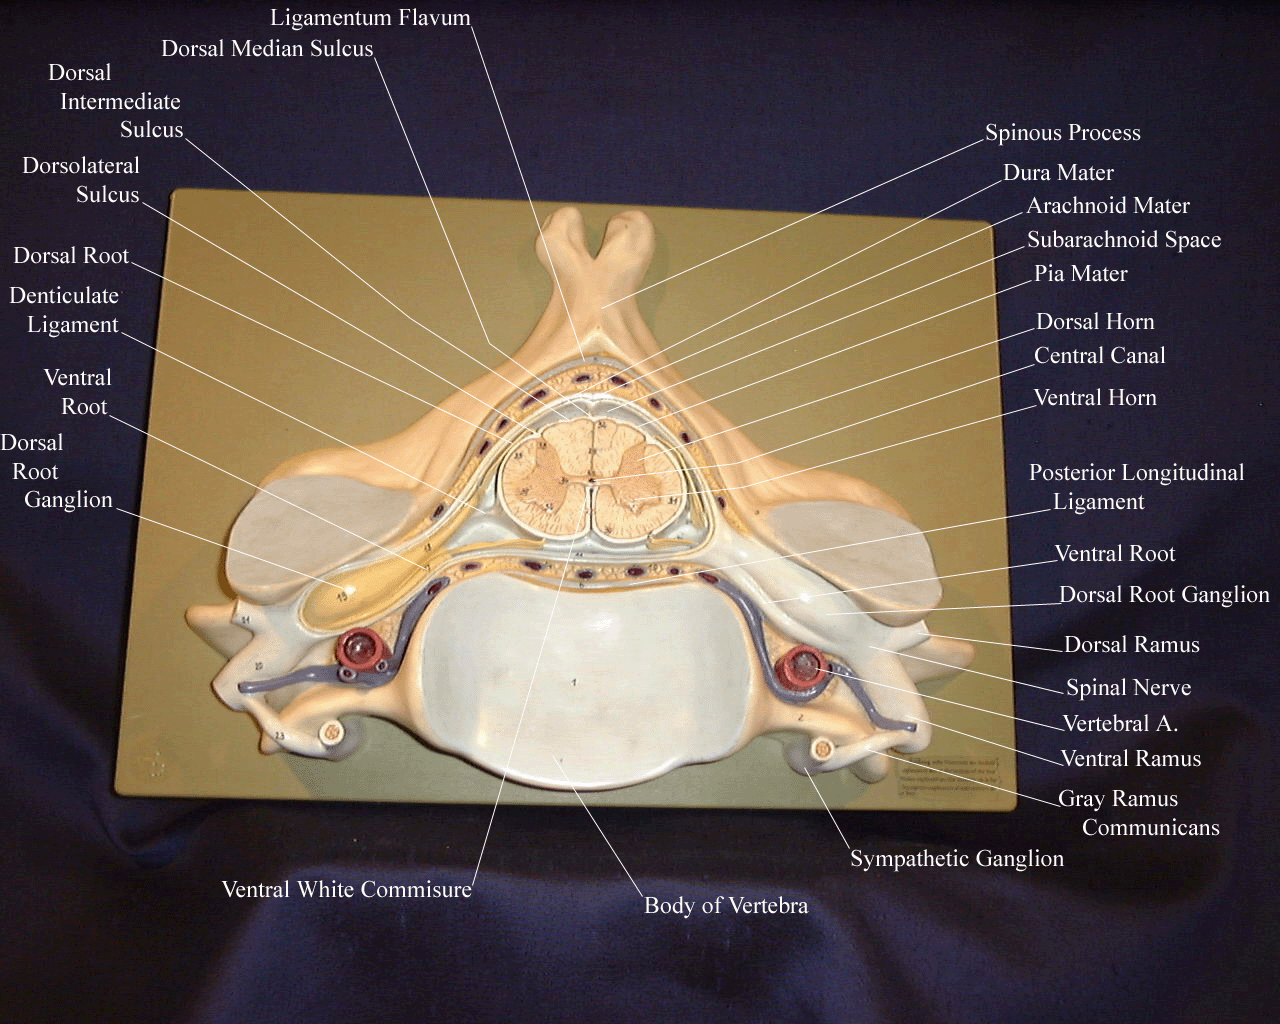 a labeled picture of a model of the spinal cord in the cervical region of the bertebral column